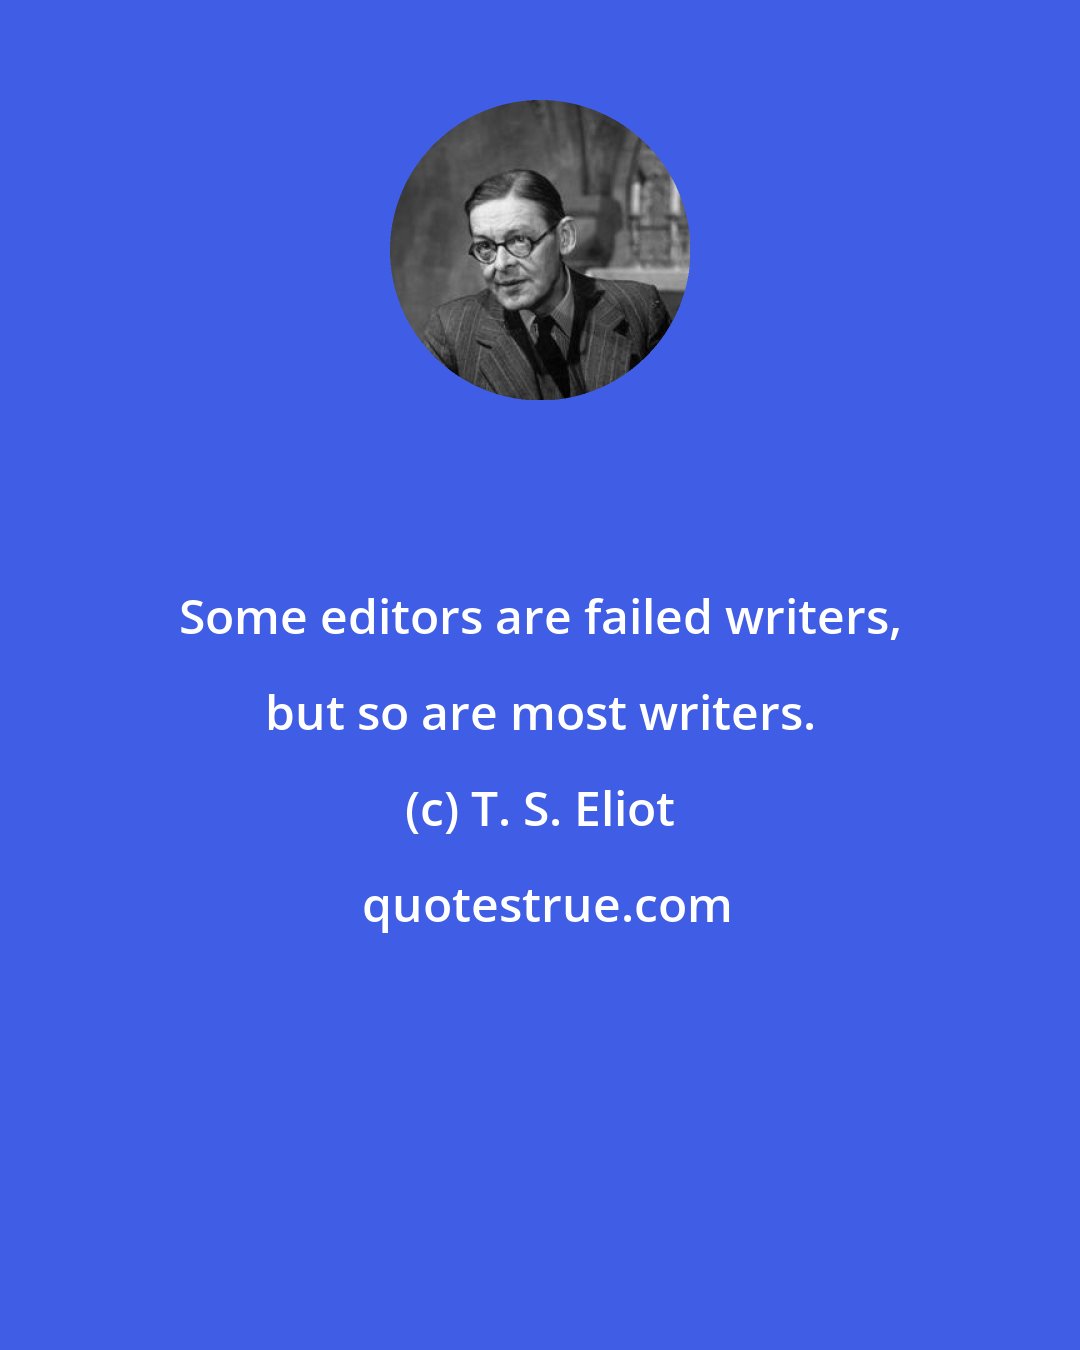 T. S. Eliot: Some editors are failed writers, but so are most writers.